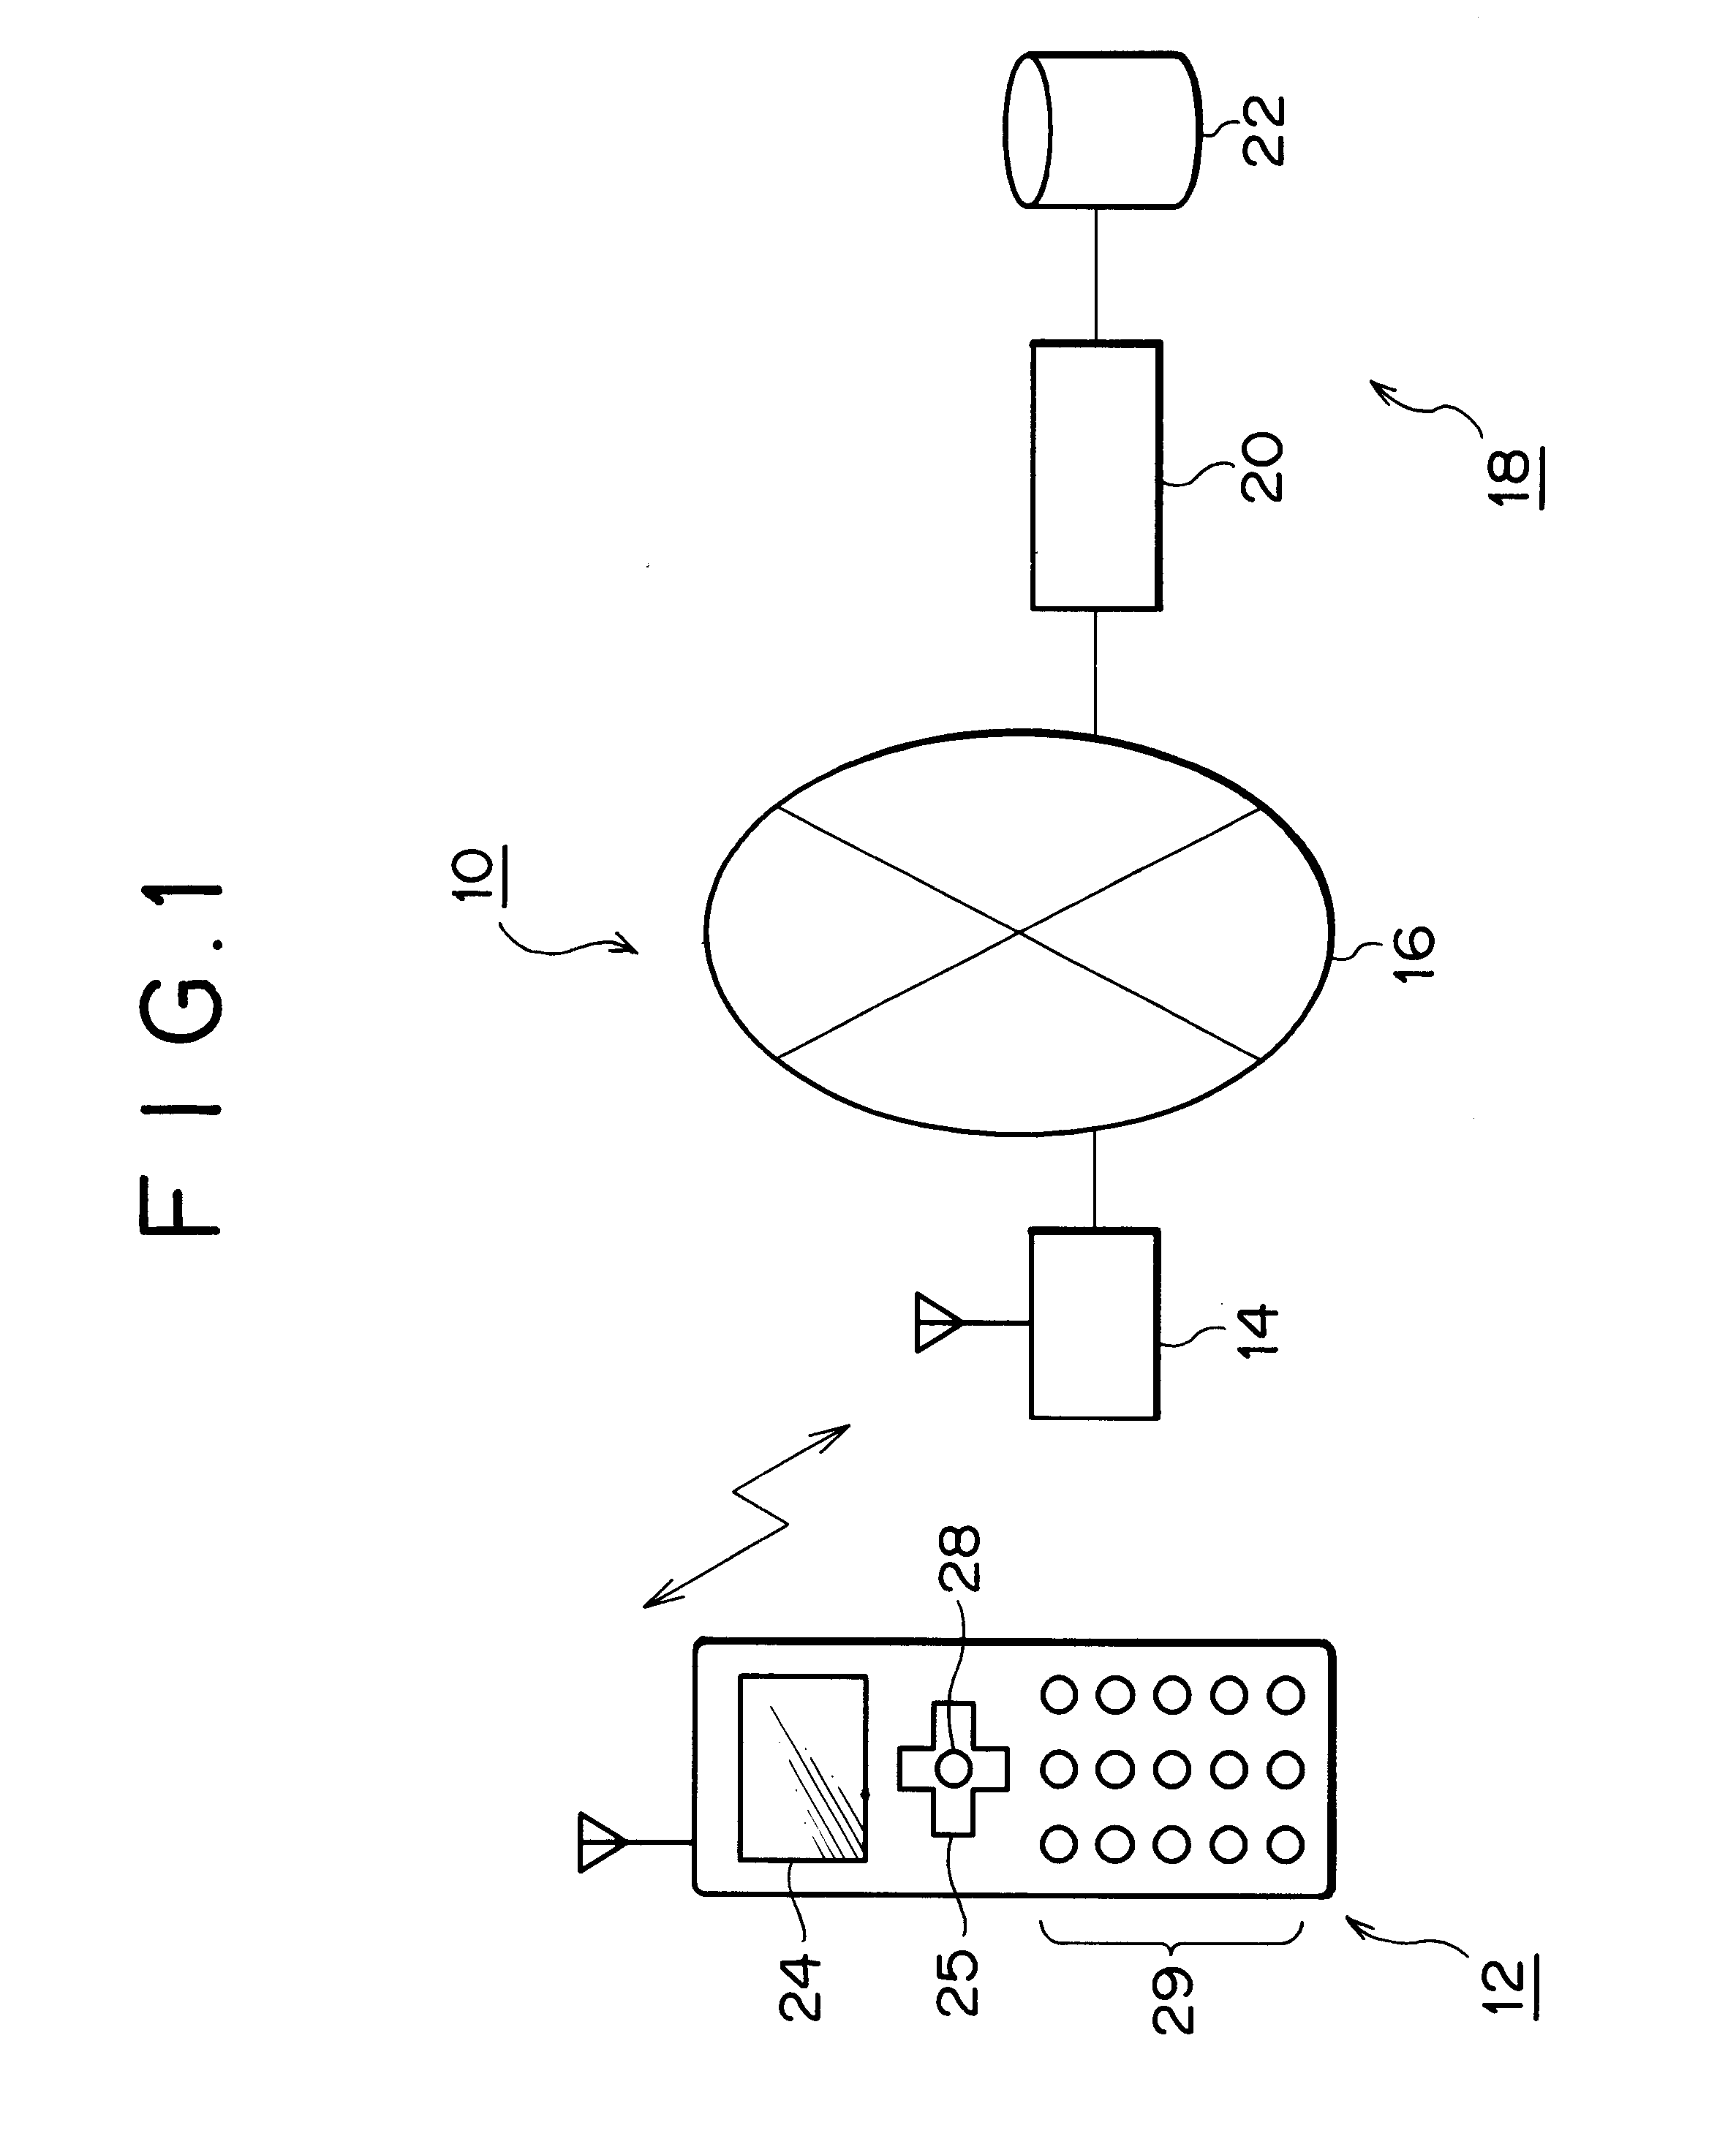 Game service provision device and method